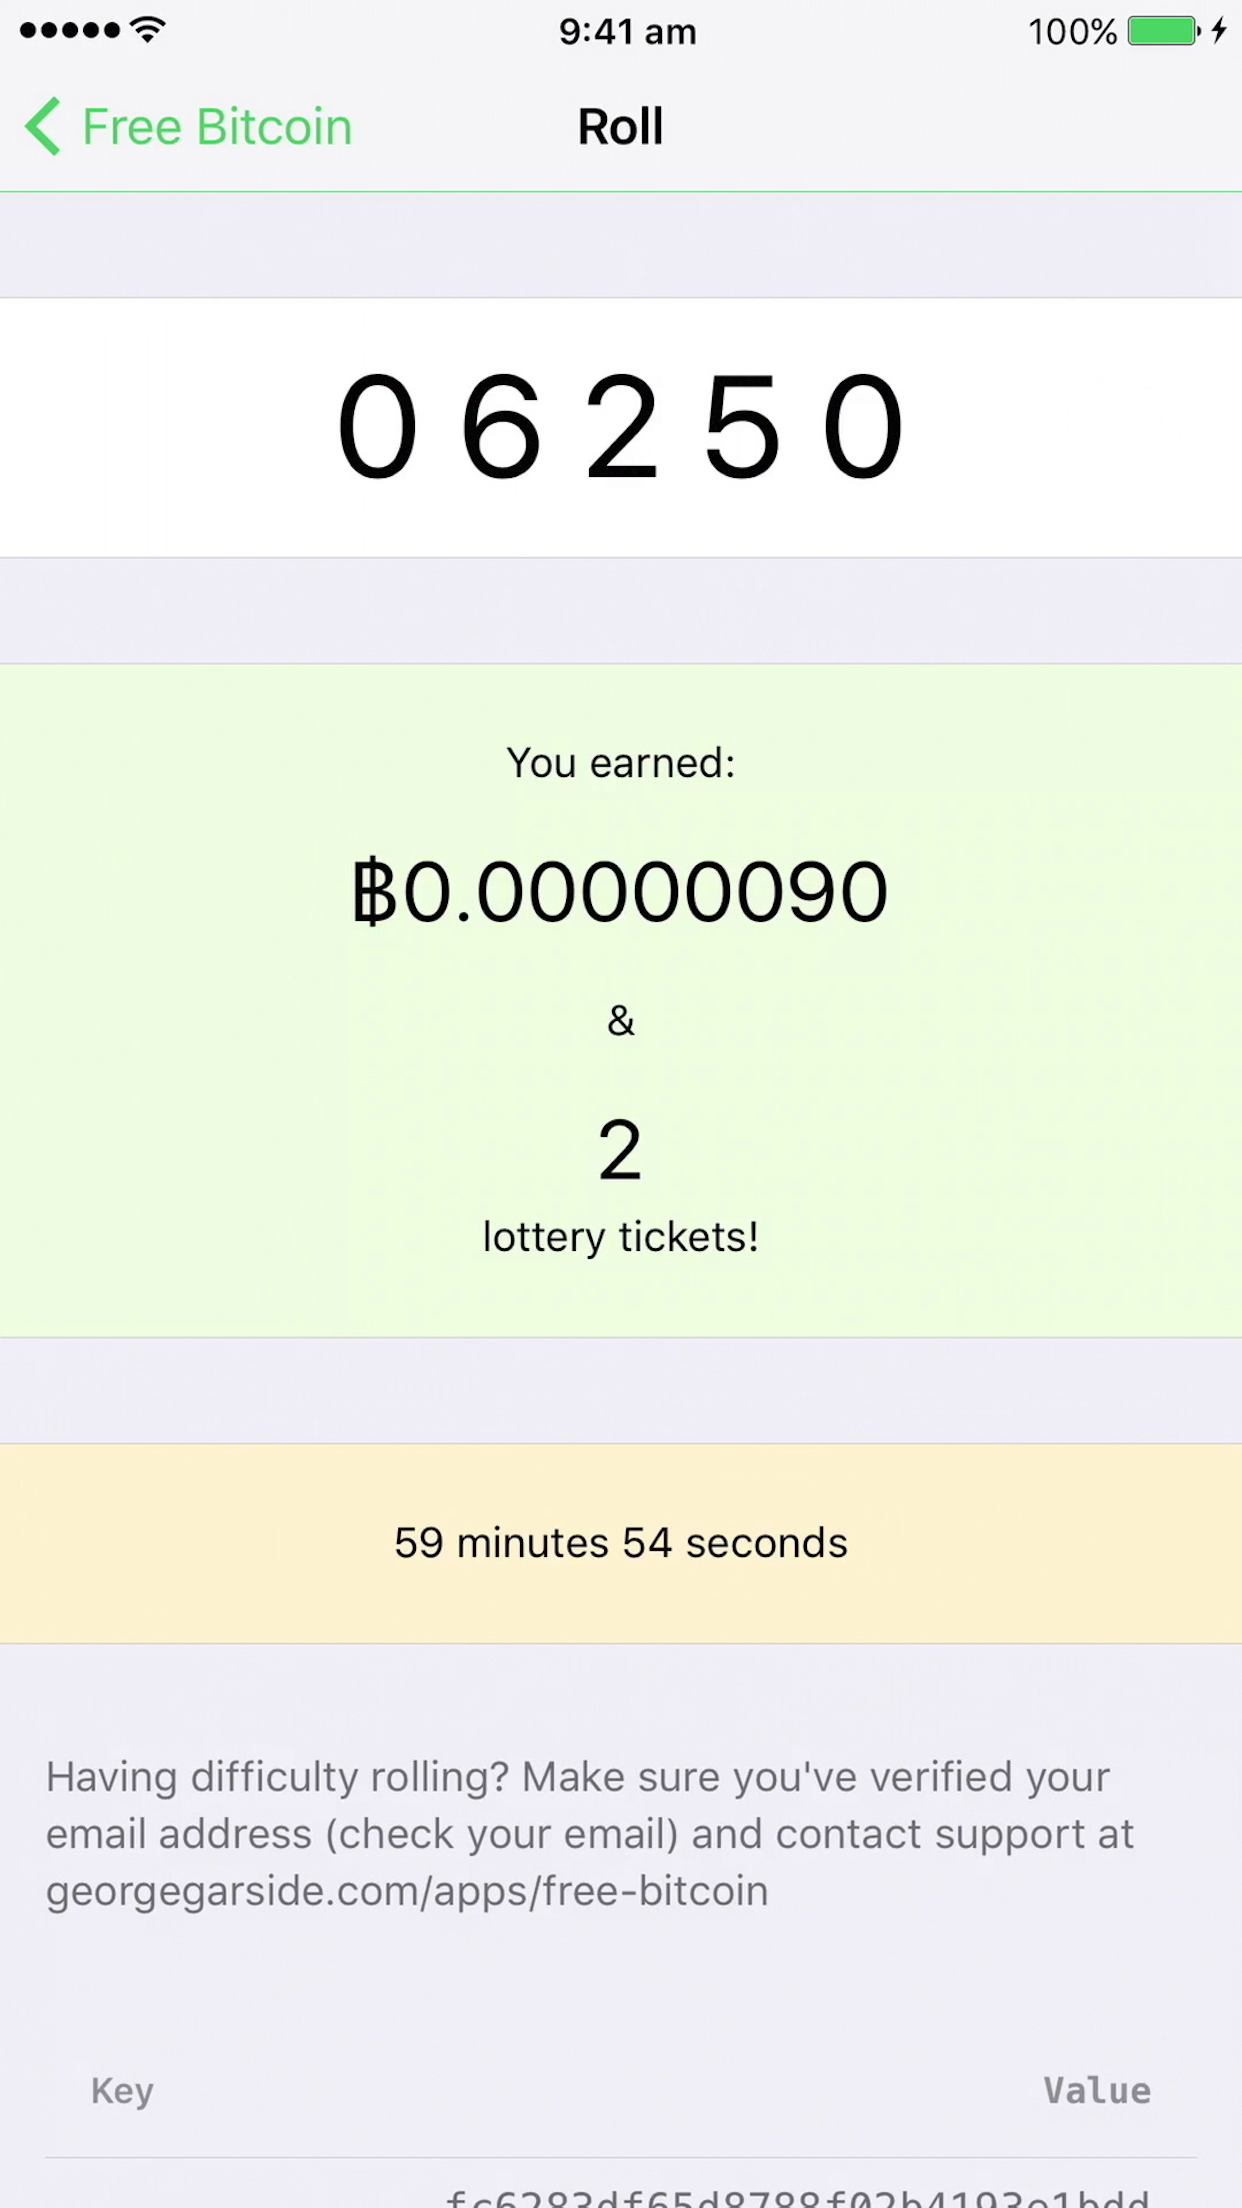 Rolled random number for bitcoin faucet